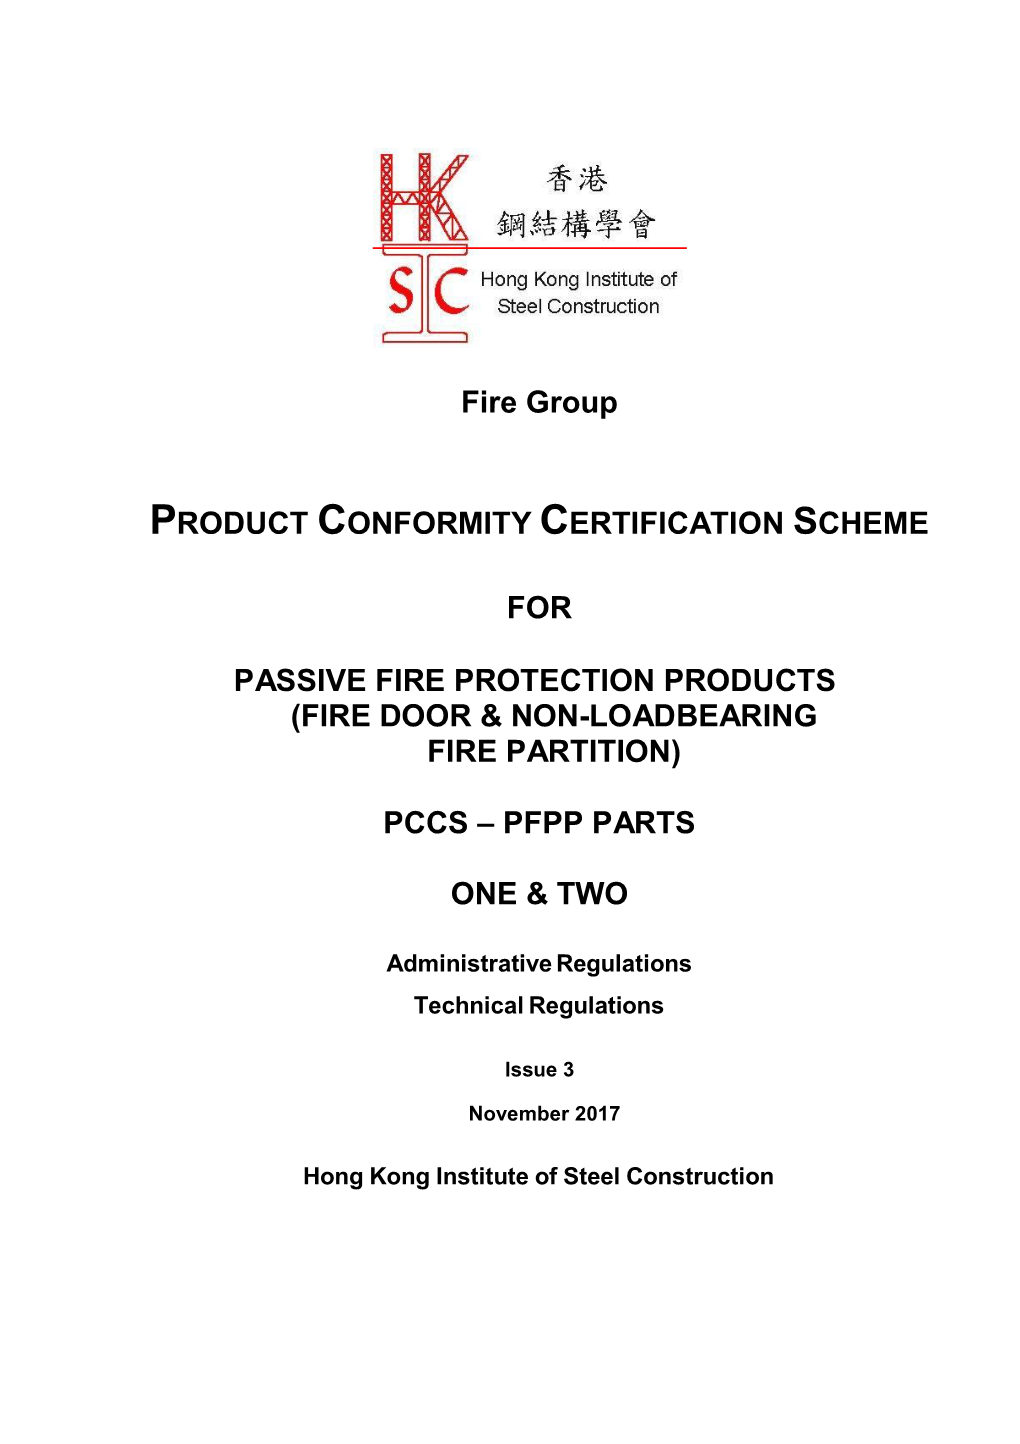 Product Conformity Certification Scheme for Passive Fire Protection Products (Fire Door & Non-Loadbearing Fire Partition) Pccs-Pfpp